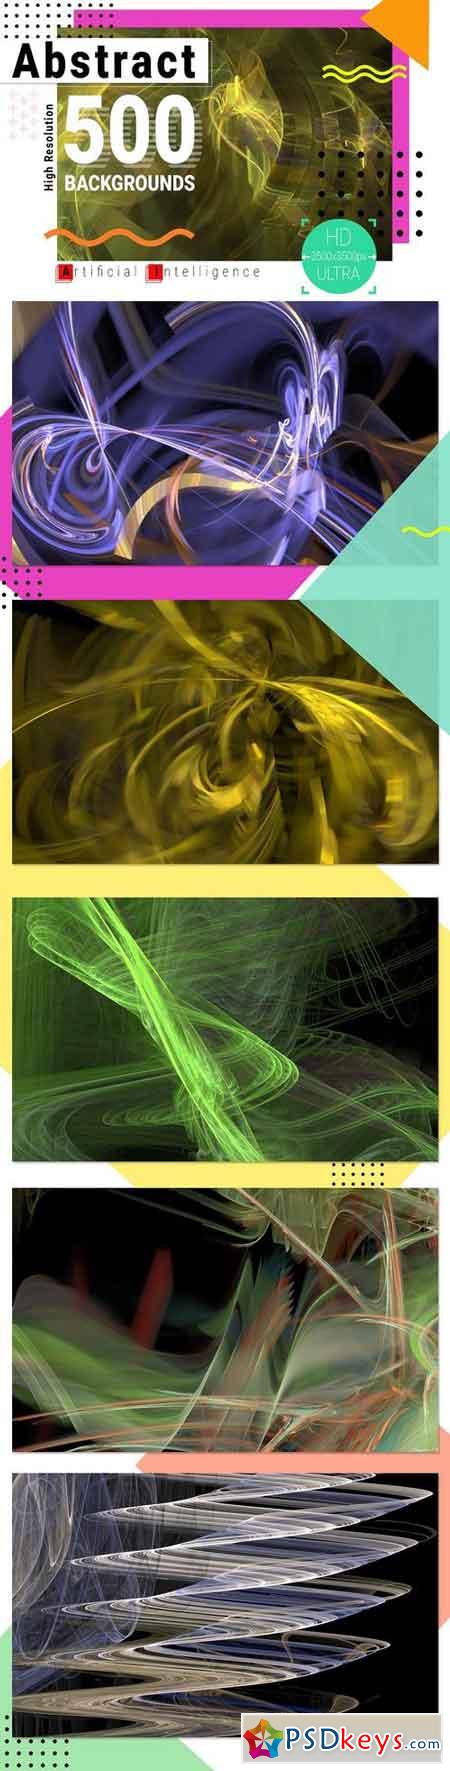 Abstract fractal 500 backgrounds 1915722